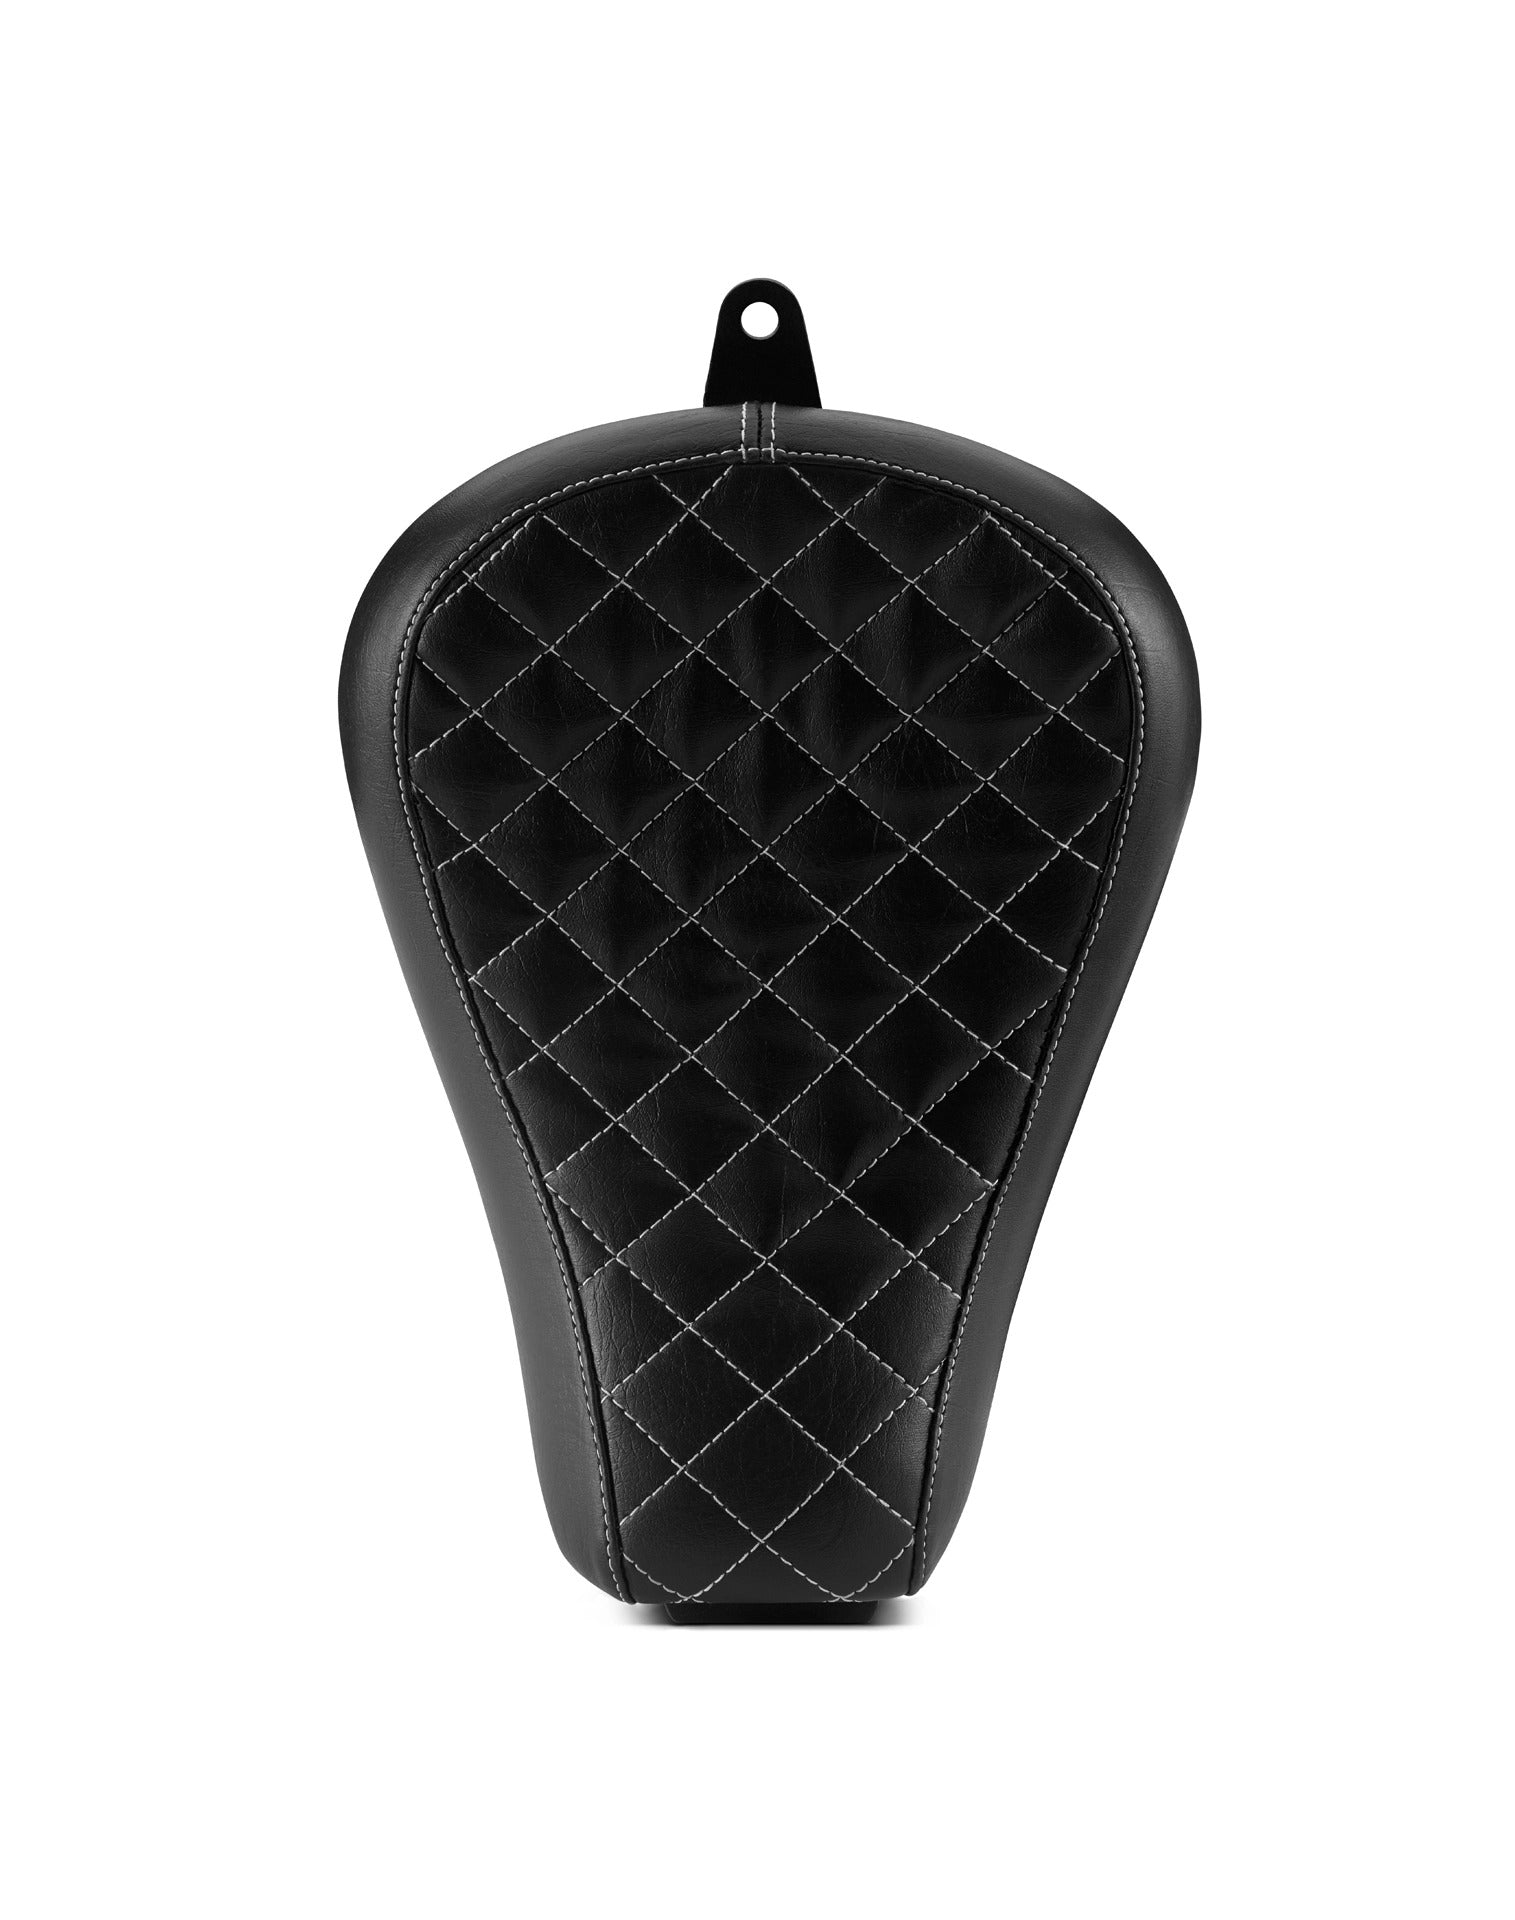 Viking Iron Born White Diamond Stitch Motorcycle Solo Seat for Harley Sportster 883 Low XL883L Front View